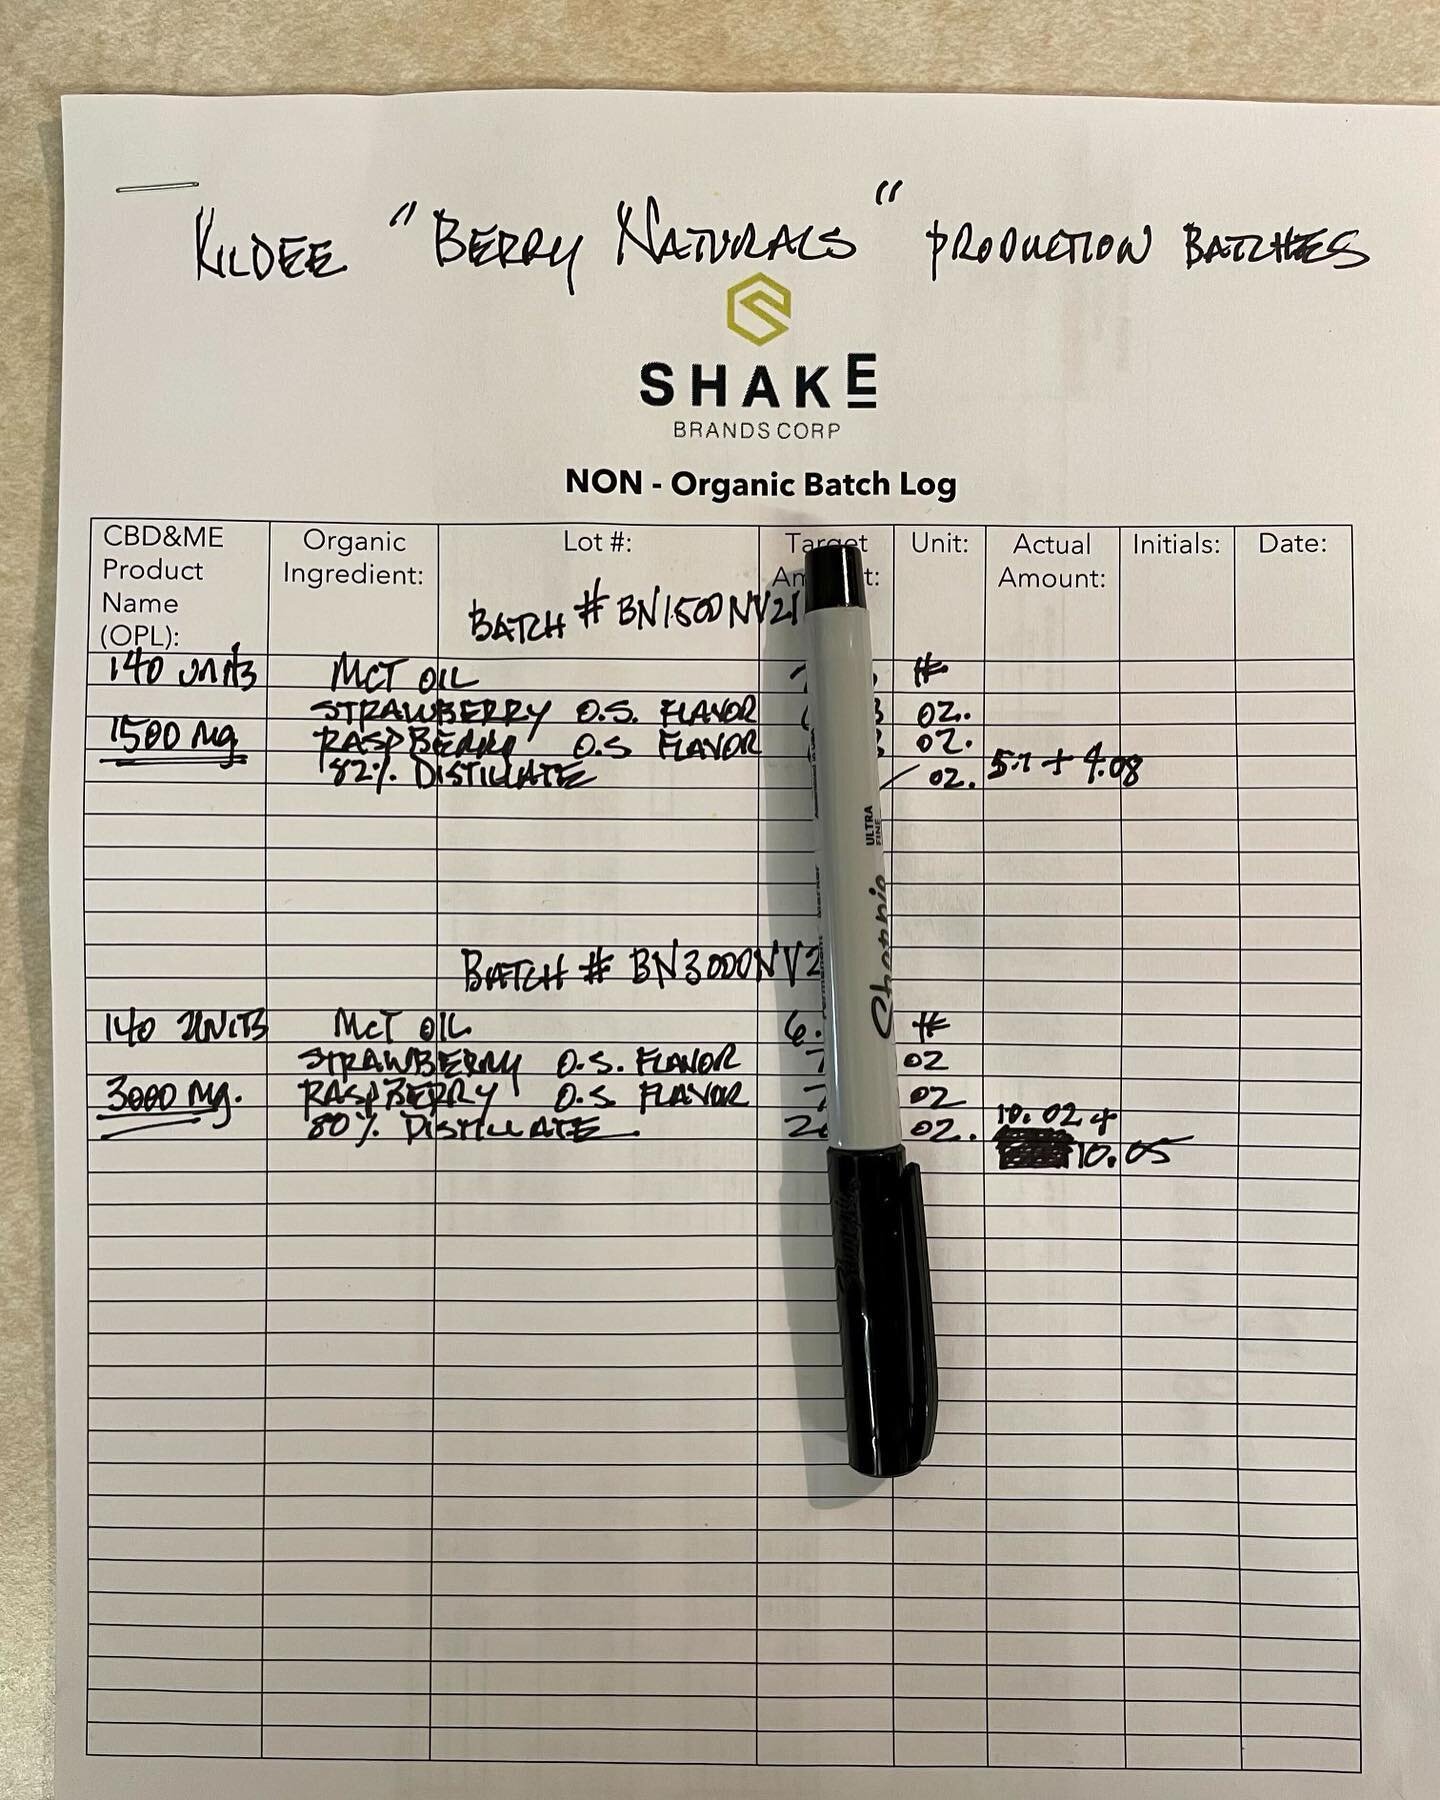 There is nothing like hand written lab notes! This is how it starts...swipe to see the end result!!! @jujubrents is killing it with her mixology skills &amp; @brit1207 has canna- branding on the lock!
#labnotes #labday #handmade #smallbatch #records 